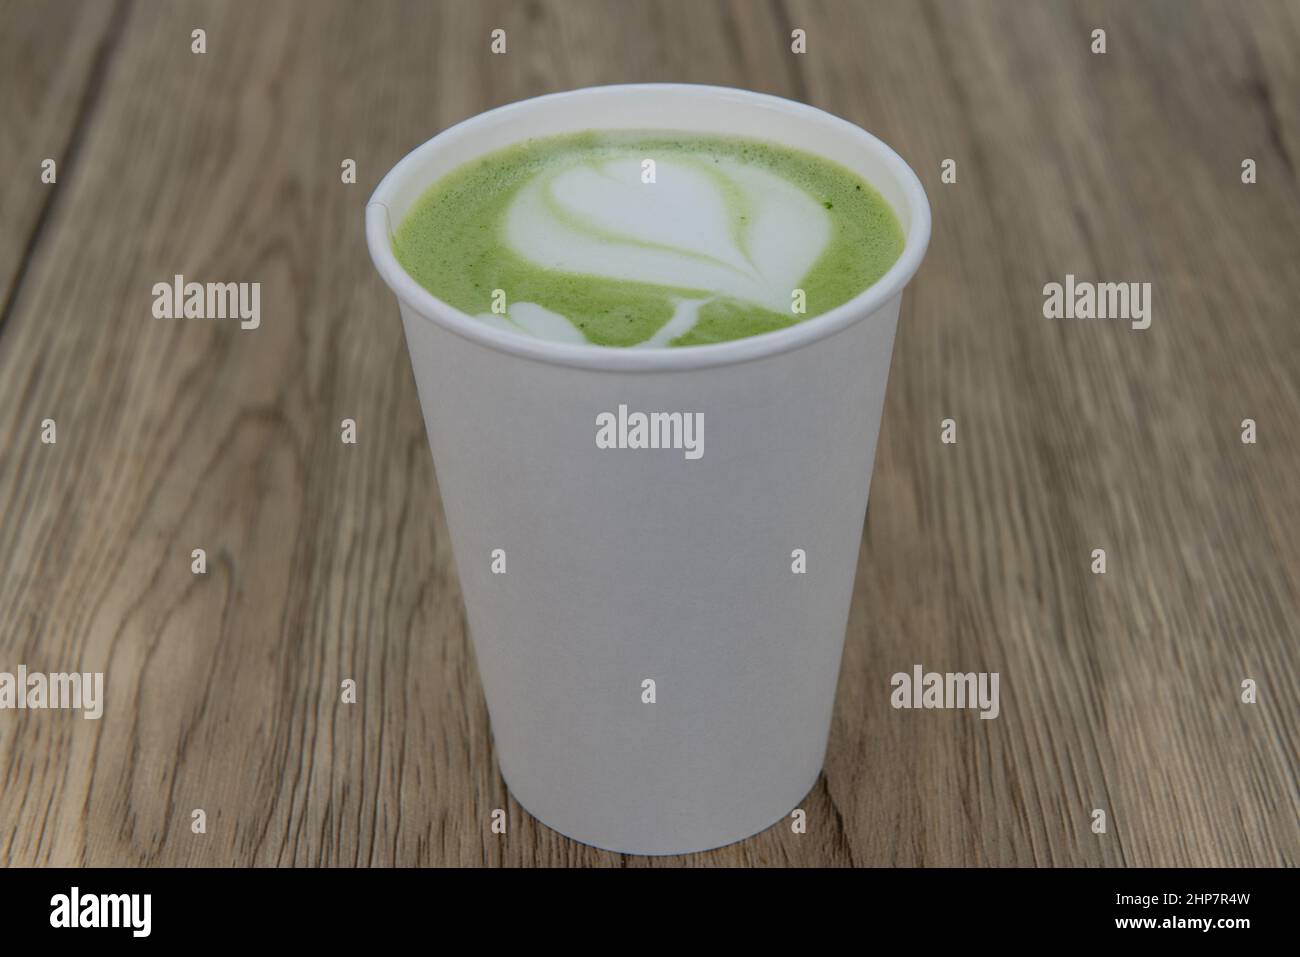 Morning addiction ritual for many Americans begins with an unhealthy cup of coffee or matcha latte. Stock Photo